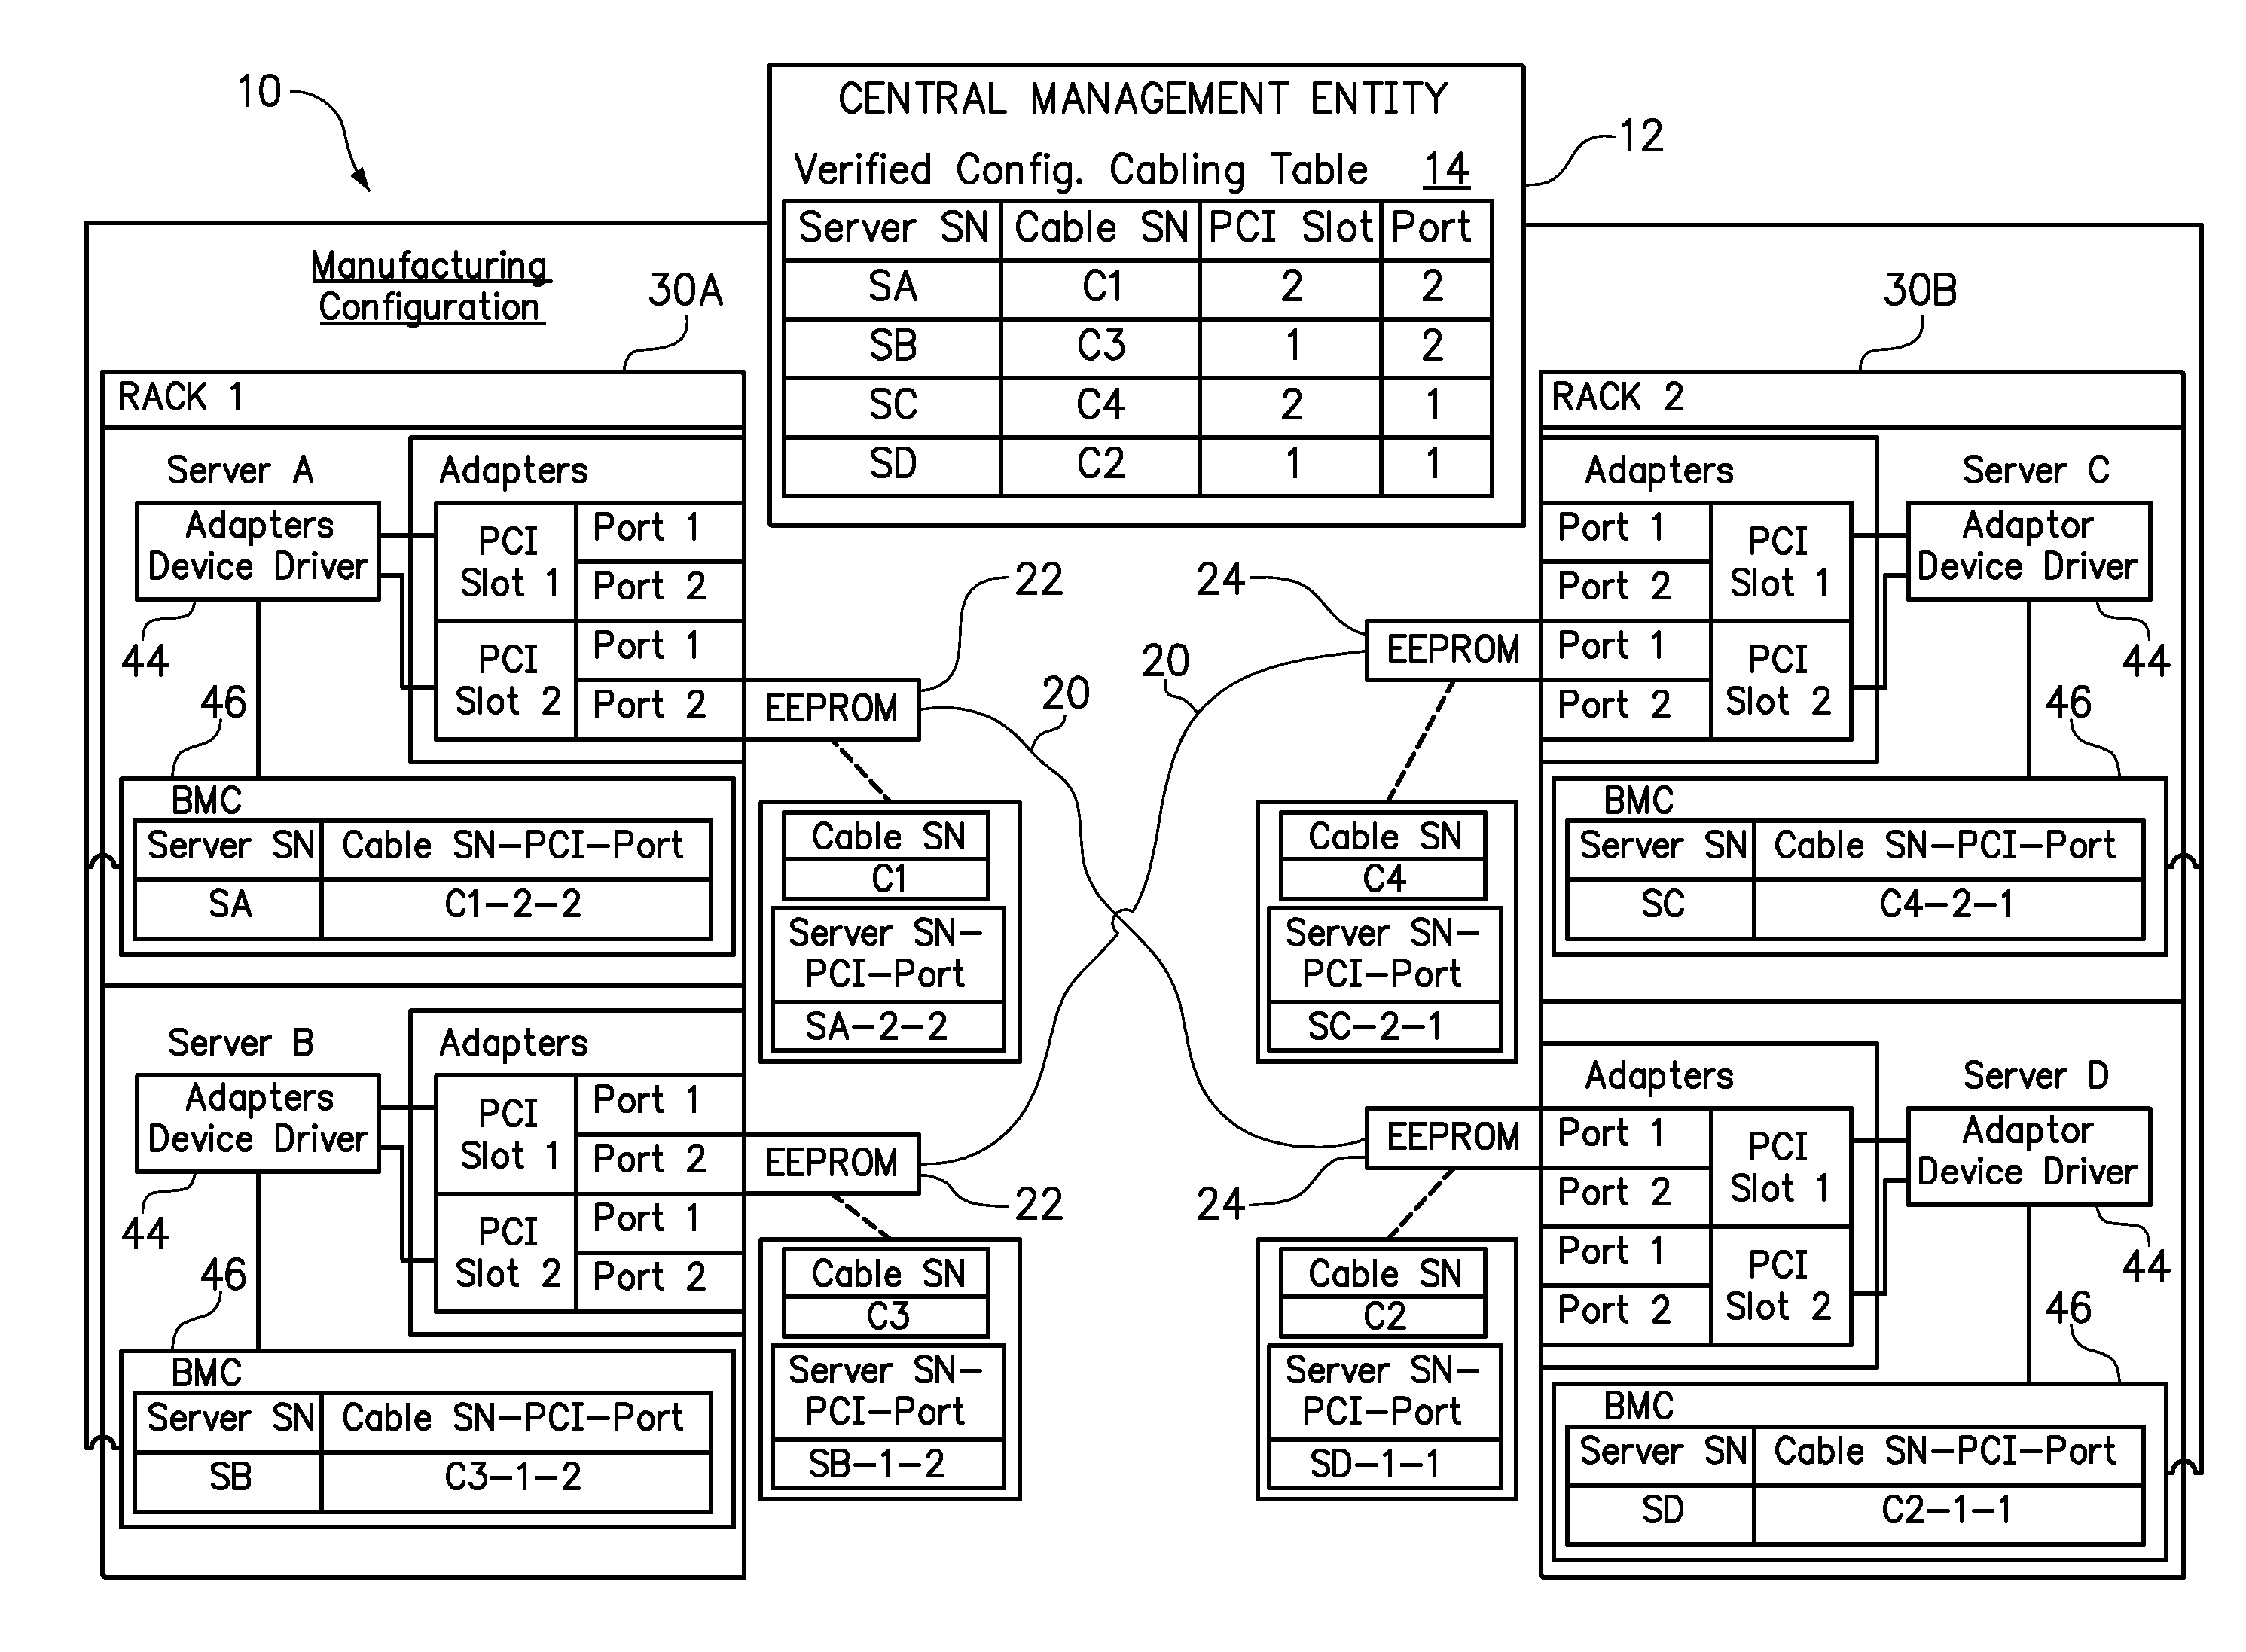 Cable adapter correlation in a cluster